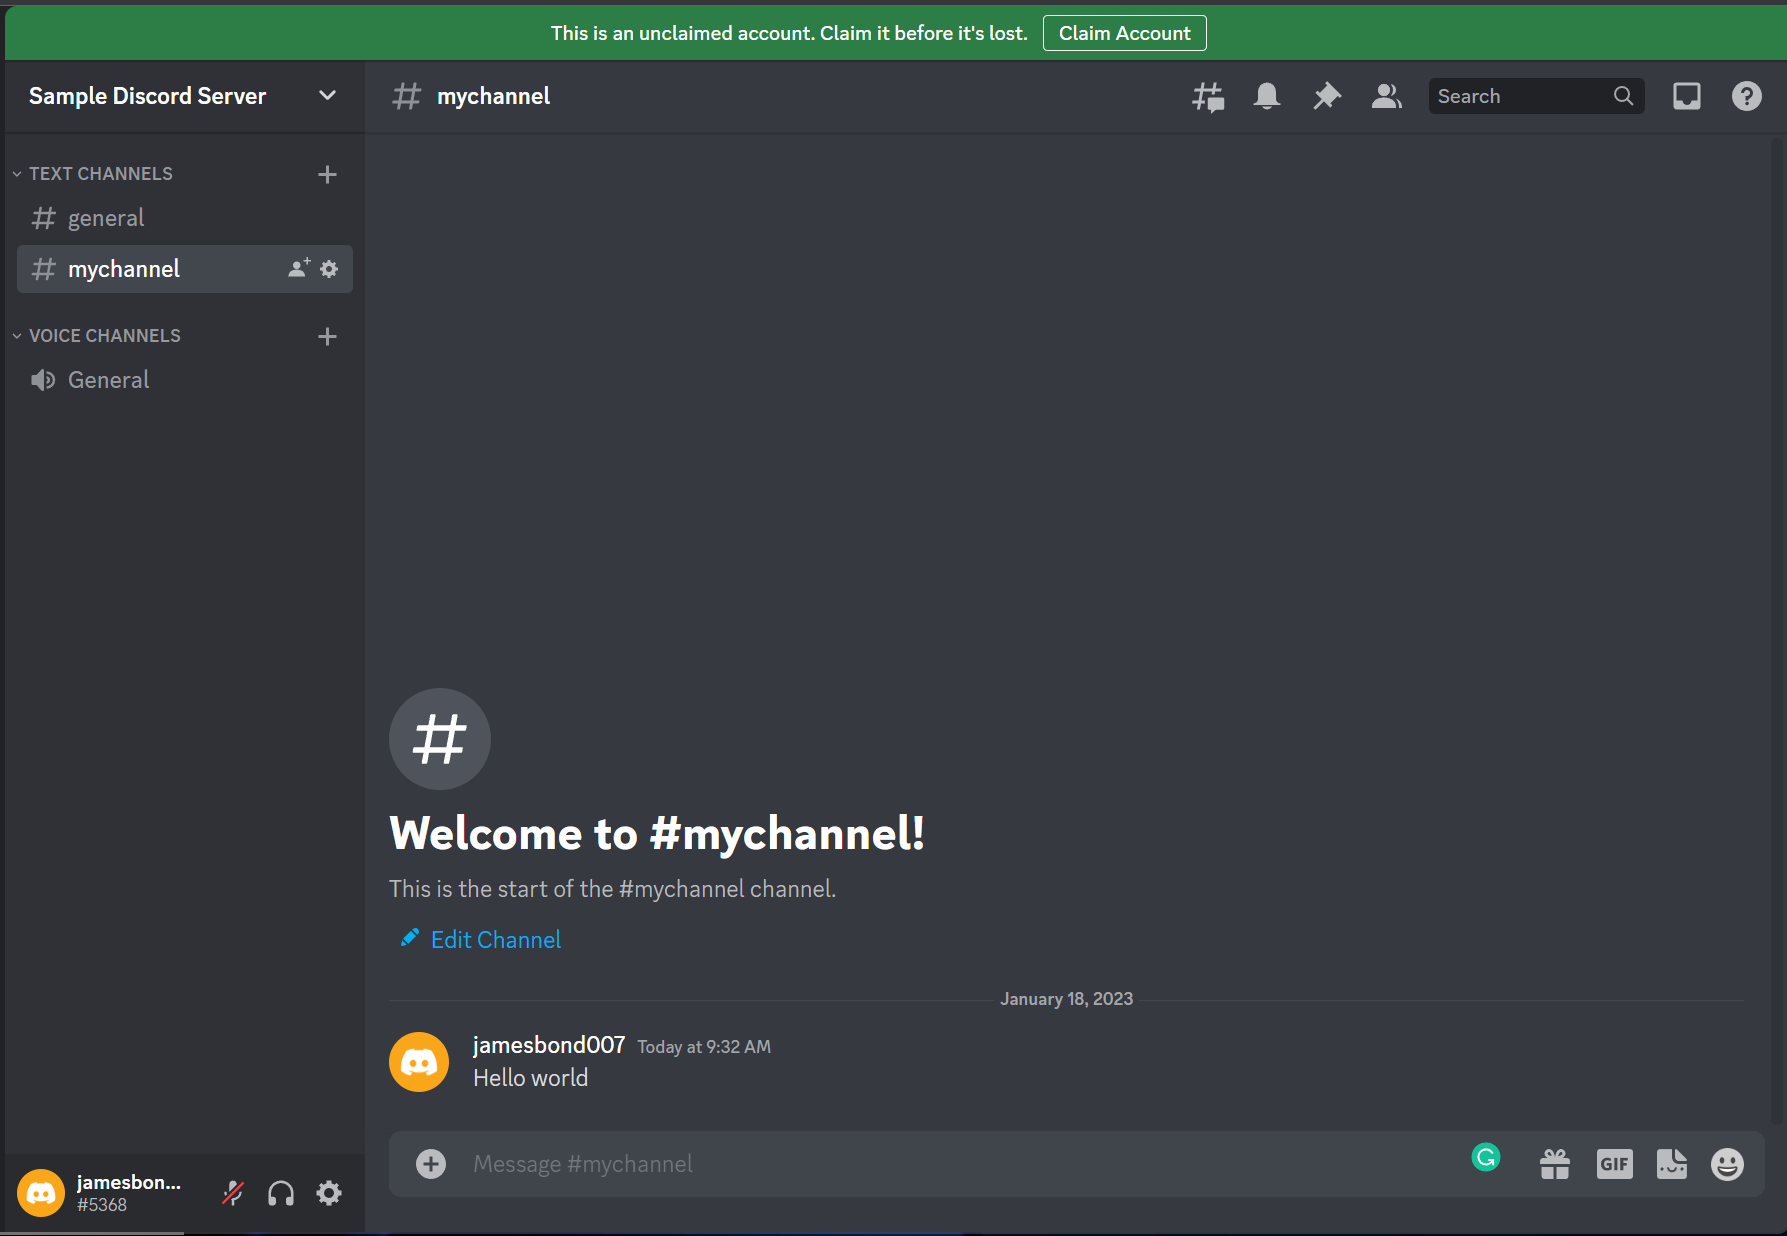 Is it possible to edit the content/ embed message of the discord